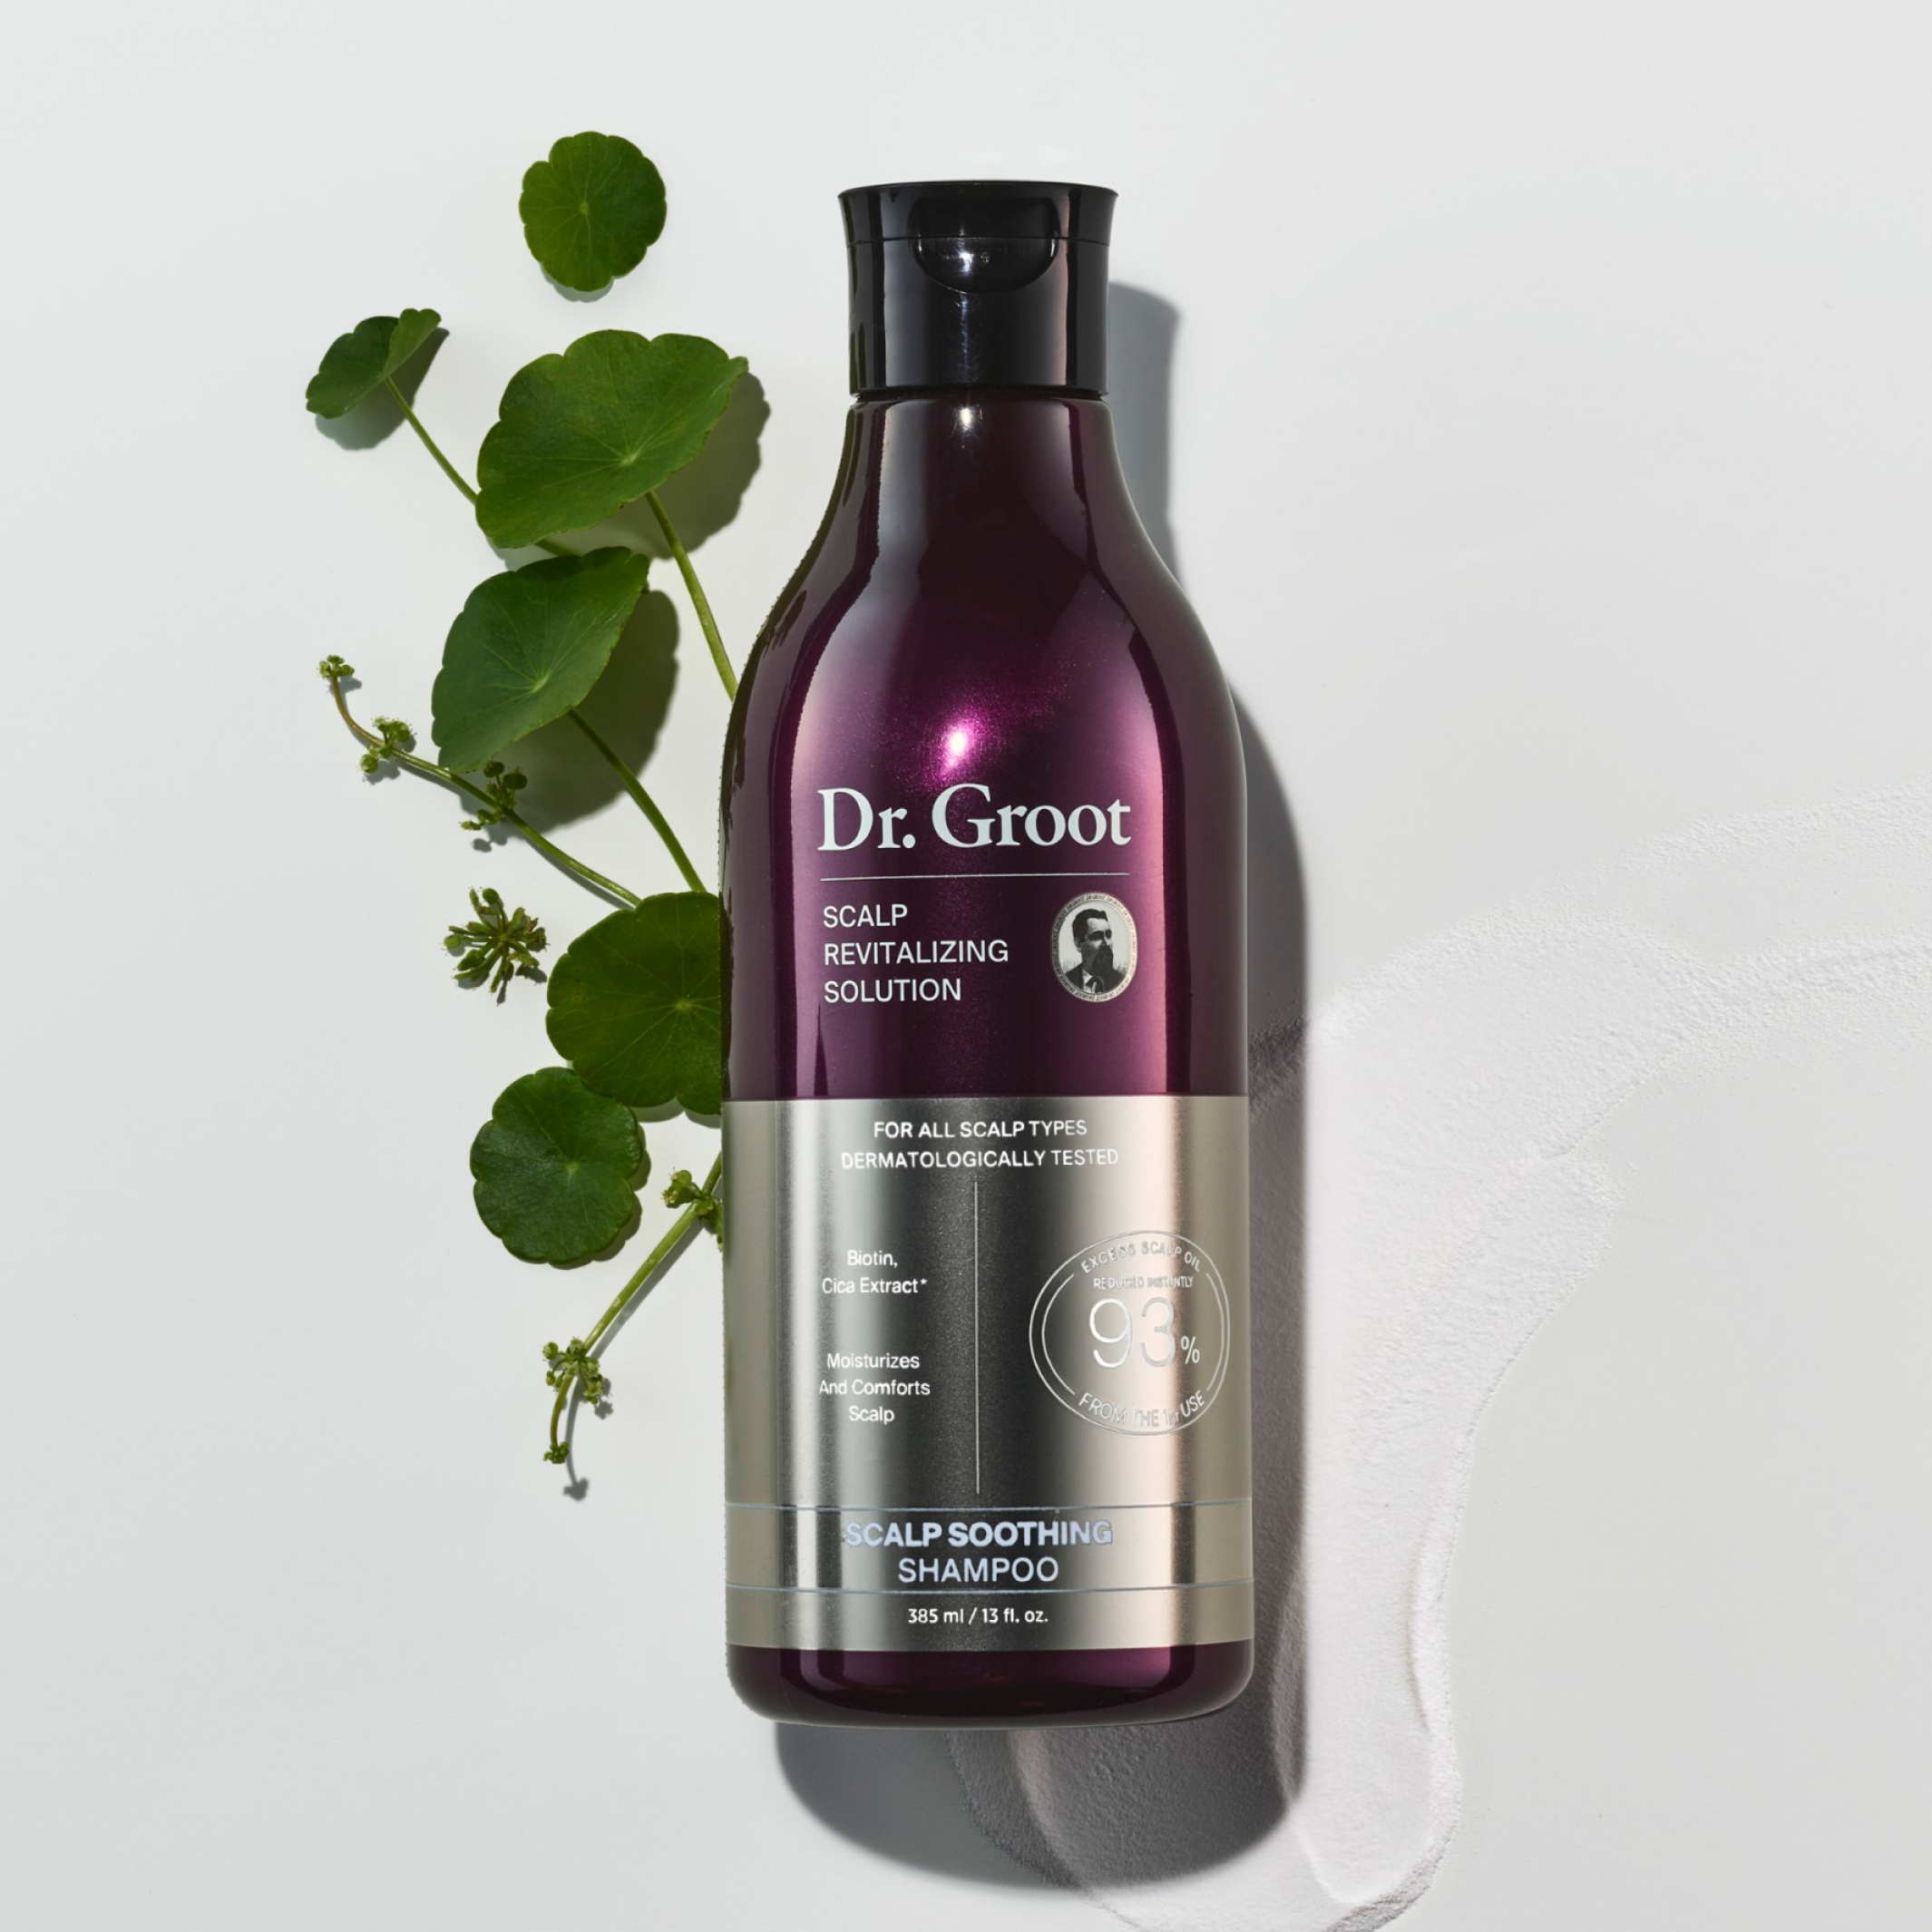 A dark purple bottle of Dr. Groot Scalp Soothing Shampoo lying on a grey surface in a white spread of the shampoo with a cica sprig.